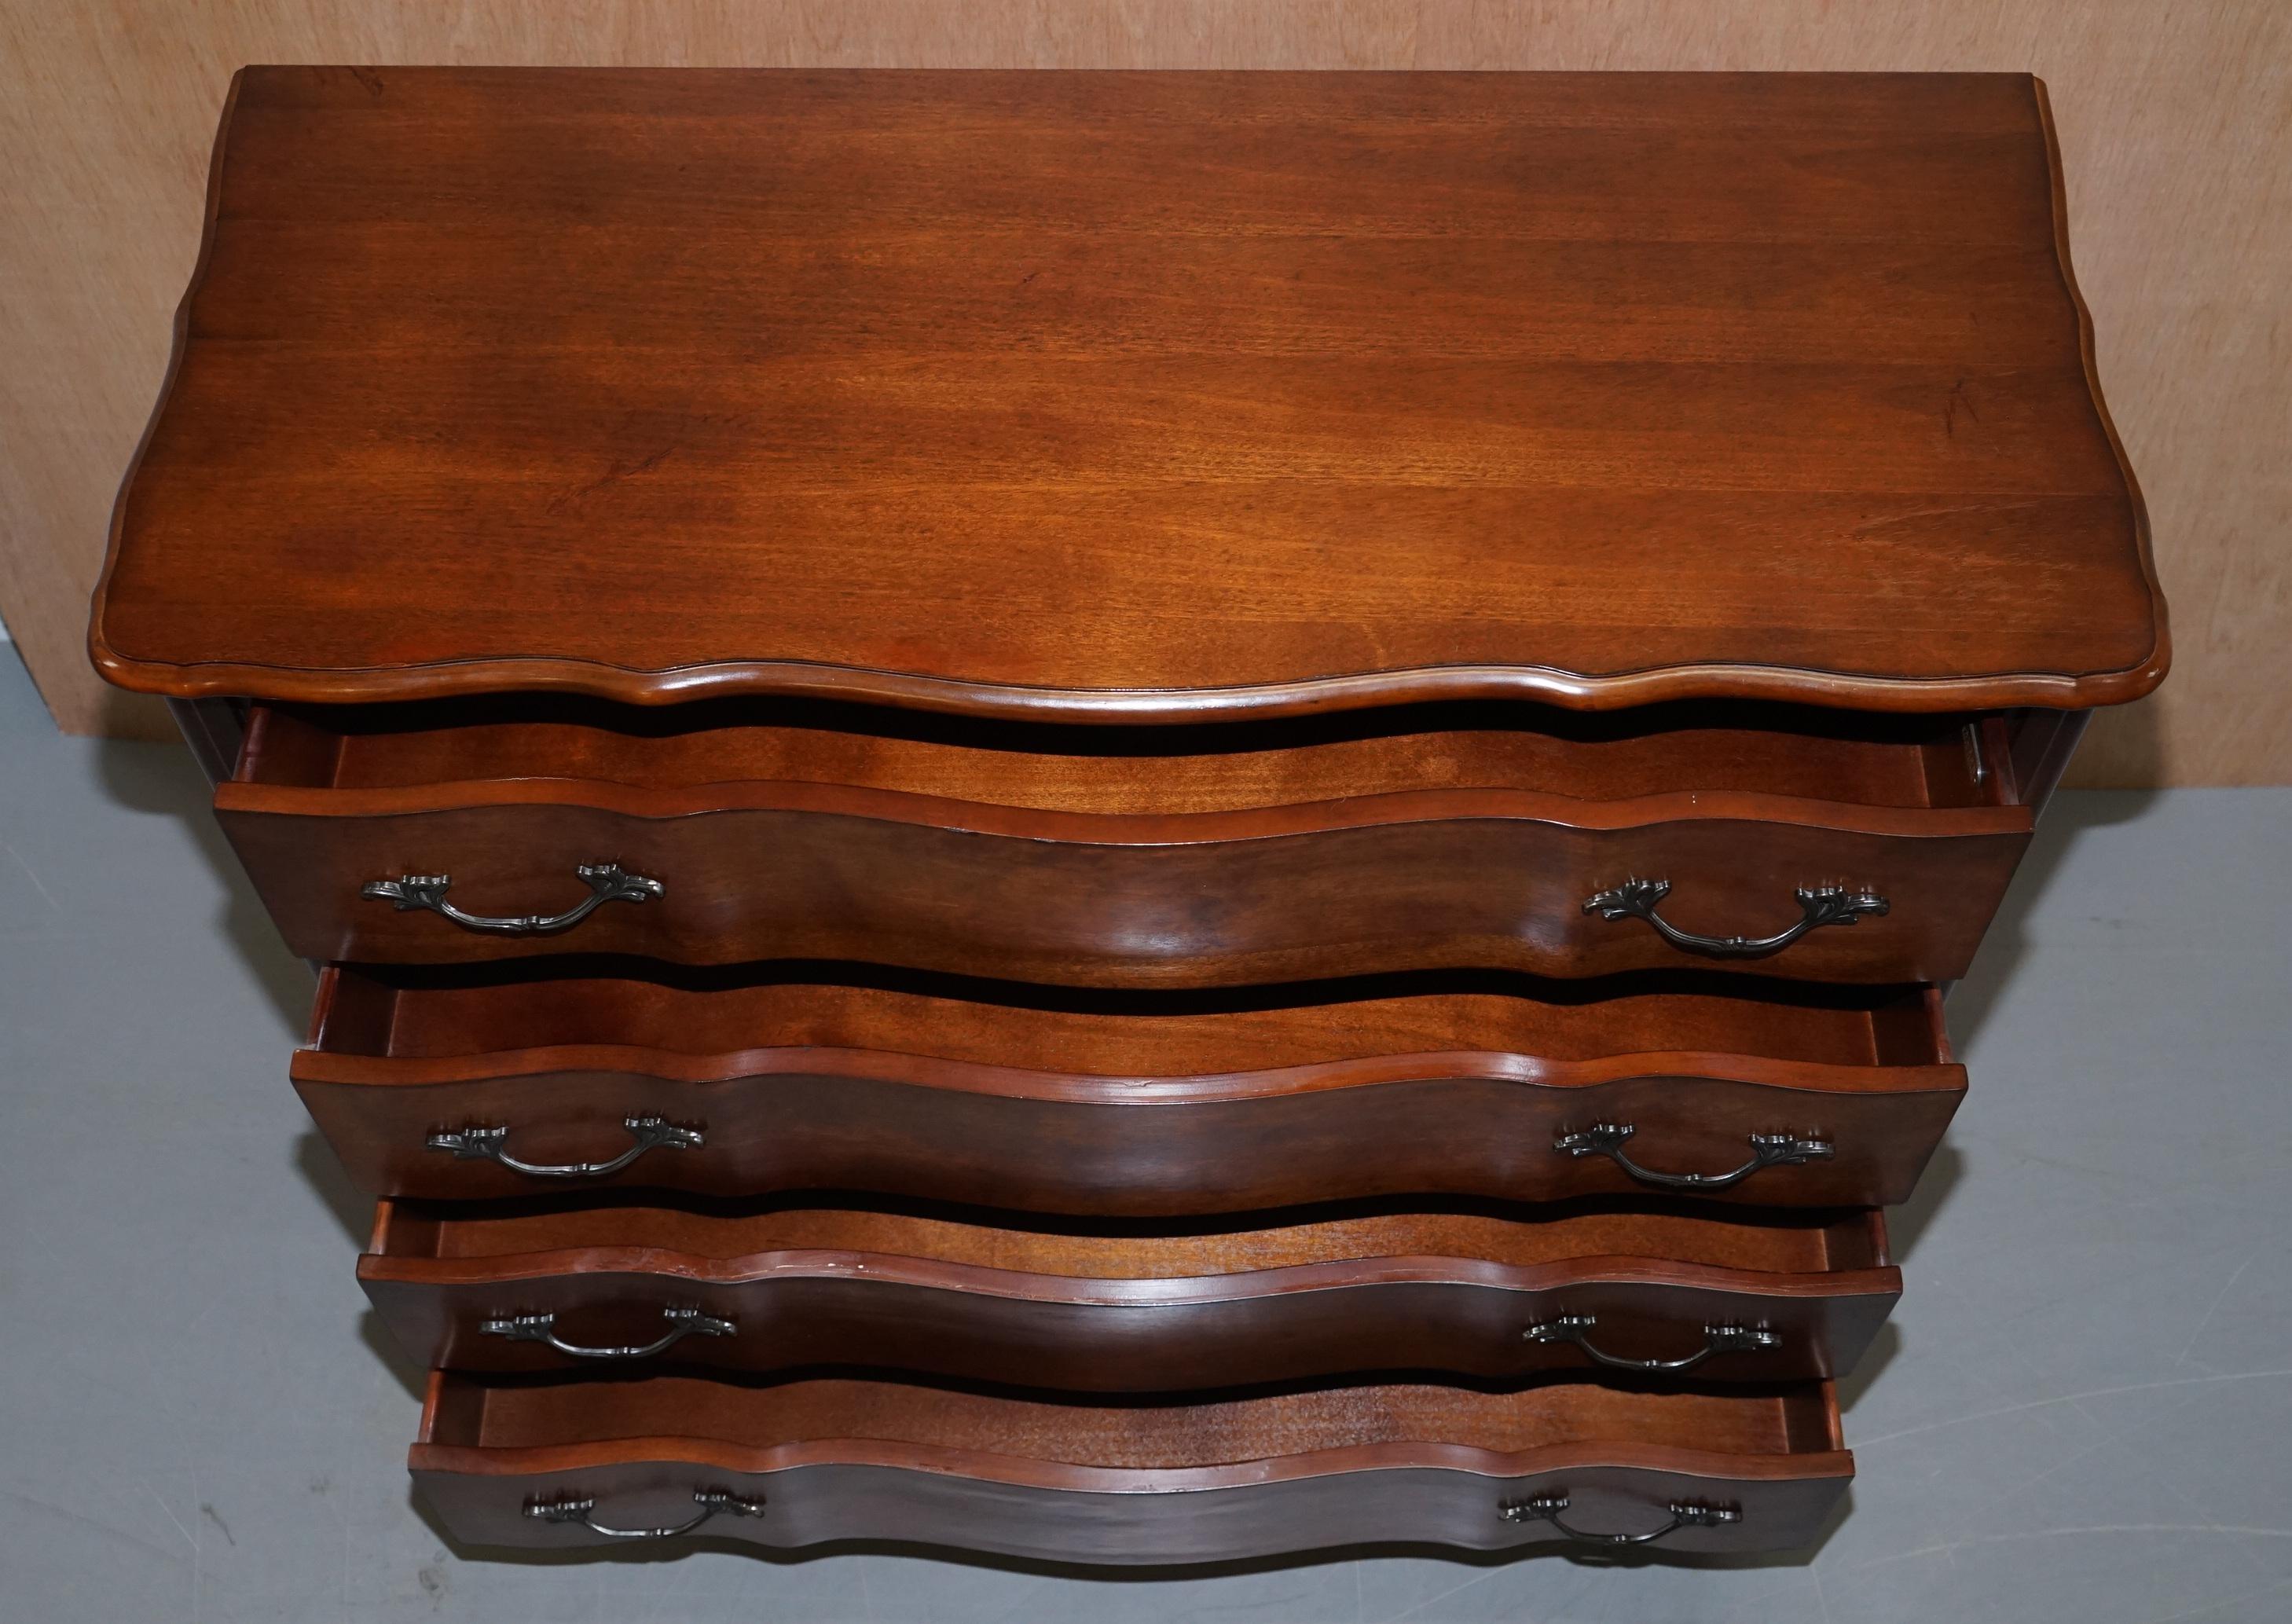 Larger Serpentine Fronted Ralph Lauren American Hardwood Chest of Drawers 14